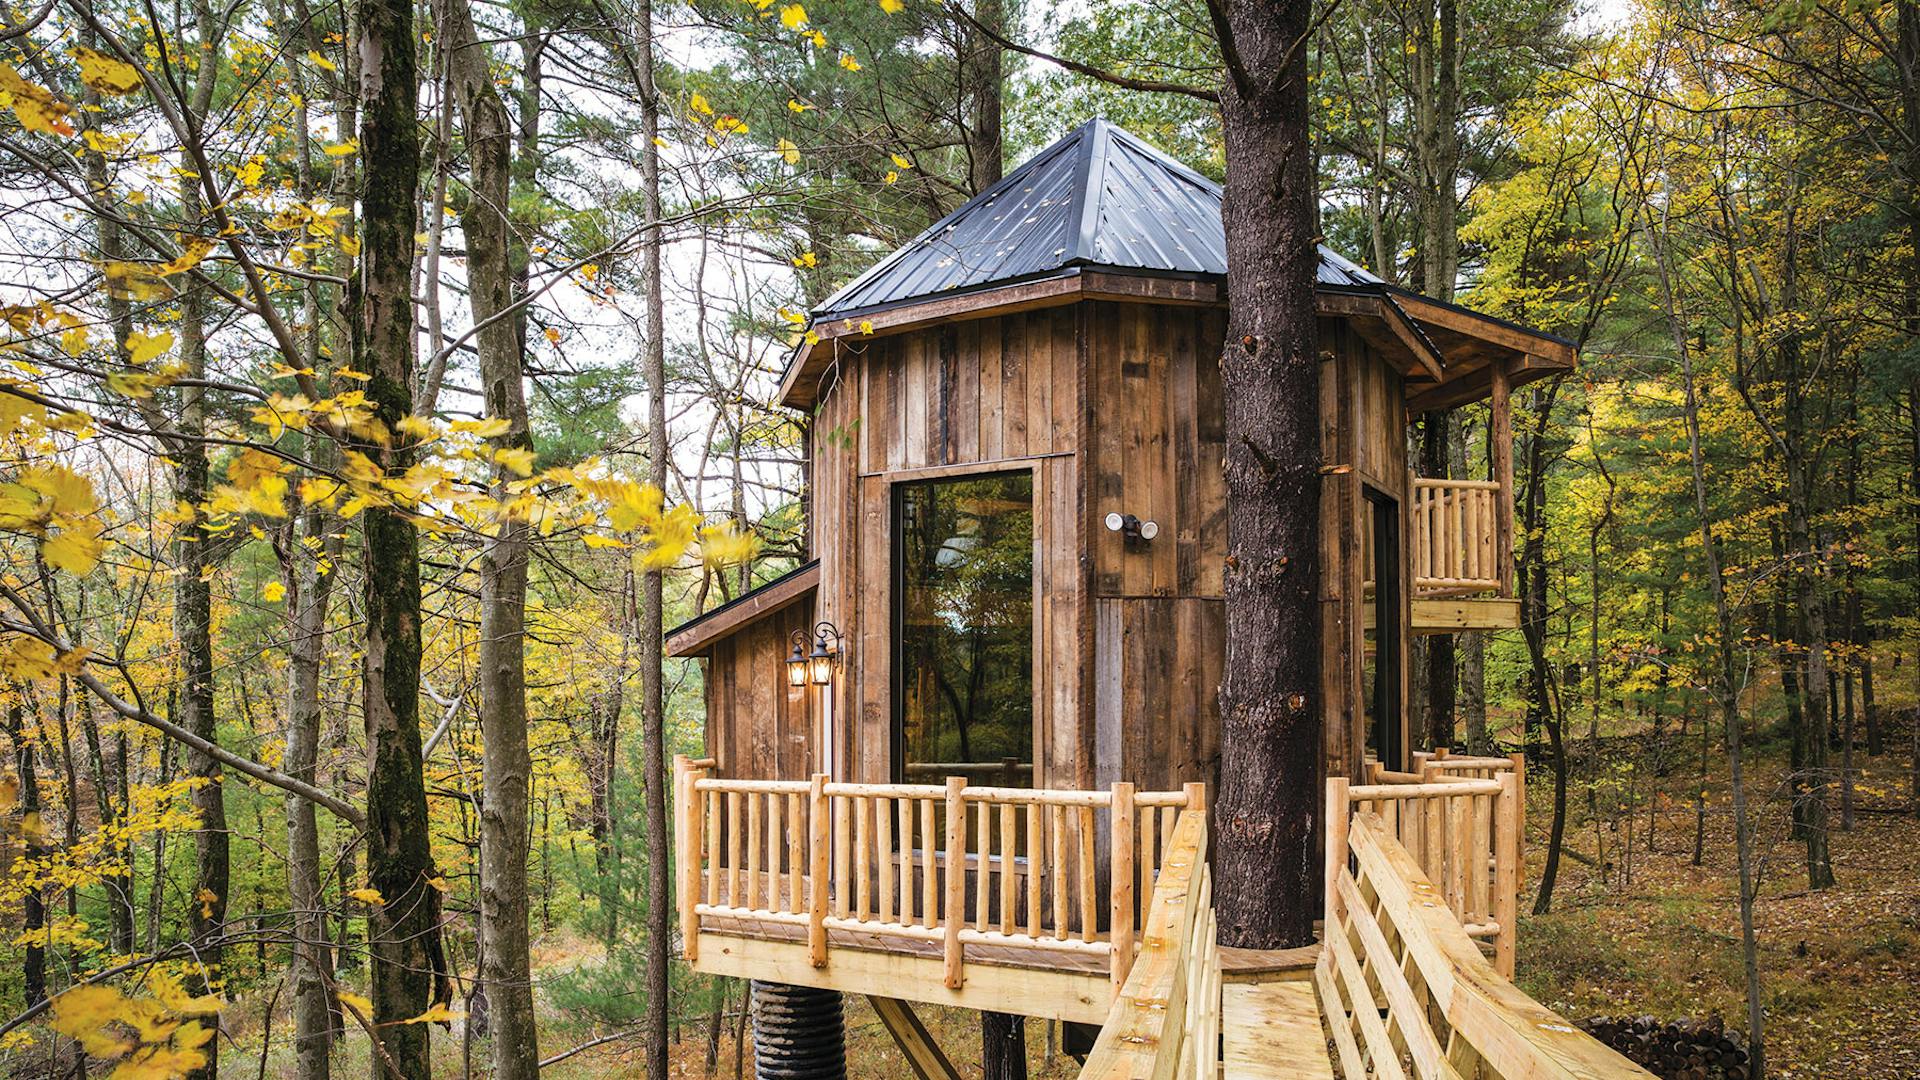 The Mohicans Treehouses in Glenmont, Ohio (photo courtesy of destination)